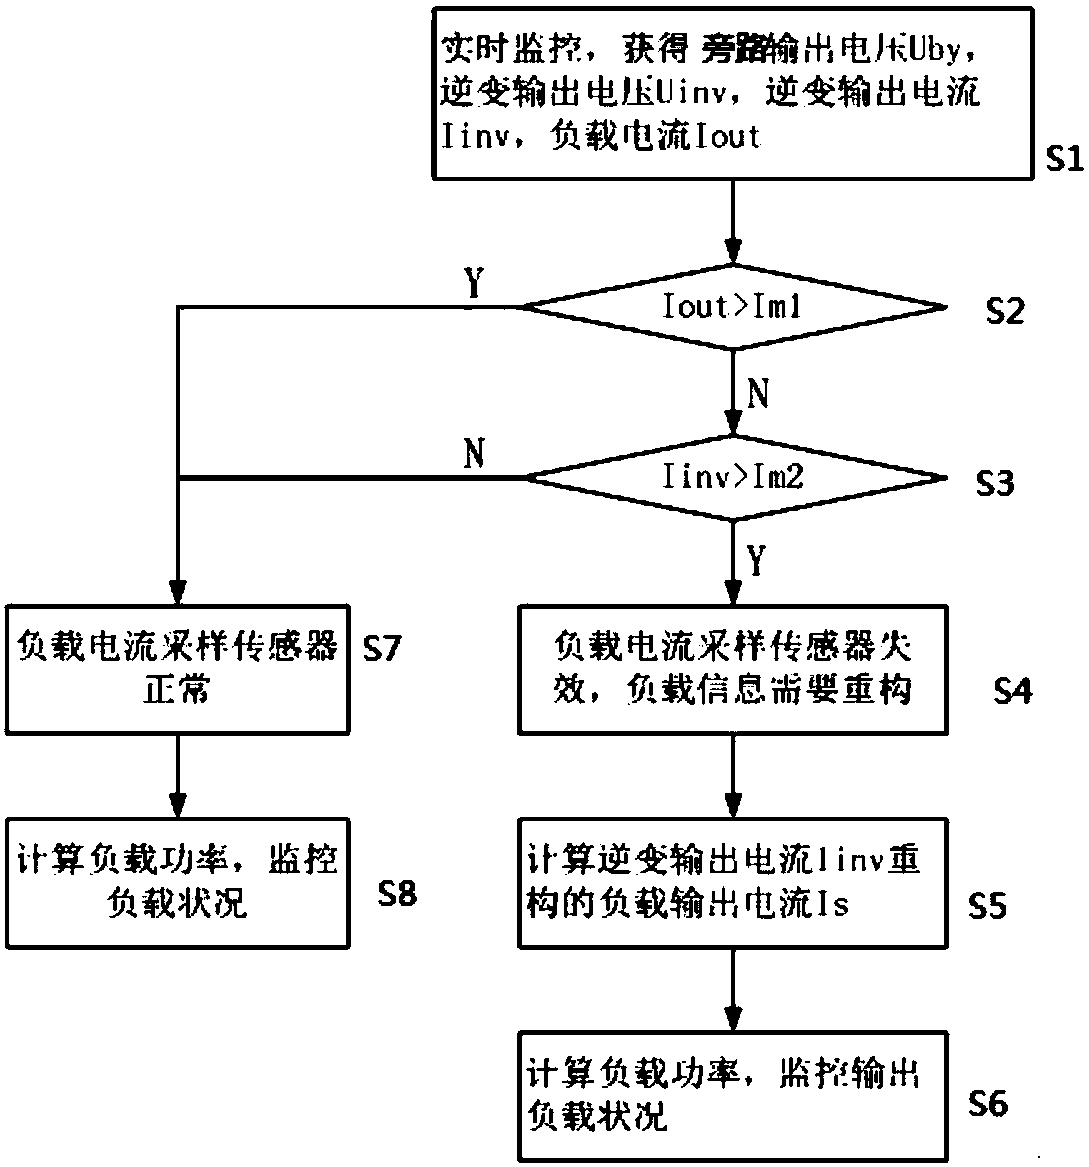 Fault-tolerant control method for UPS load current acquisition failure and device employing method